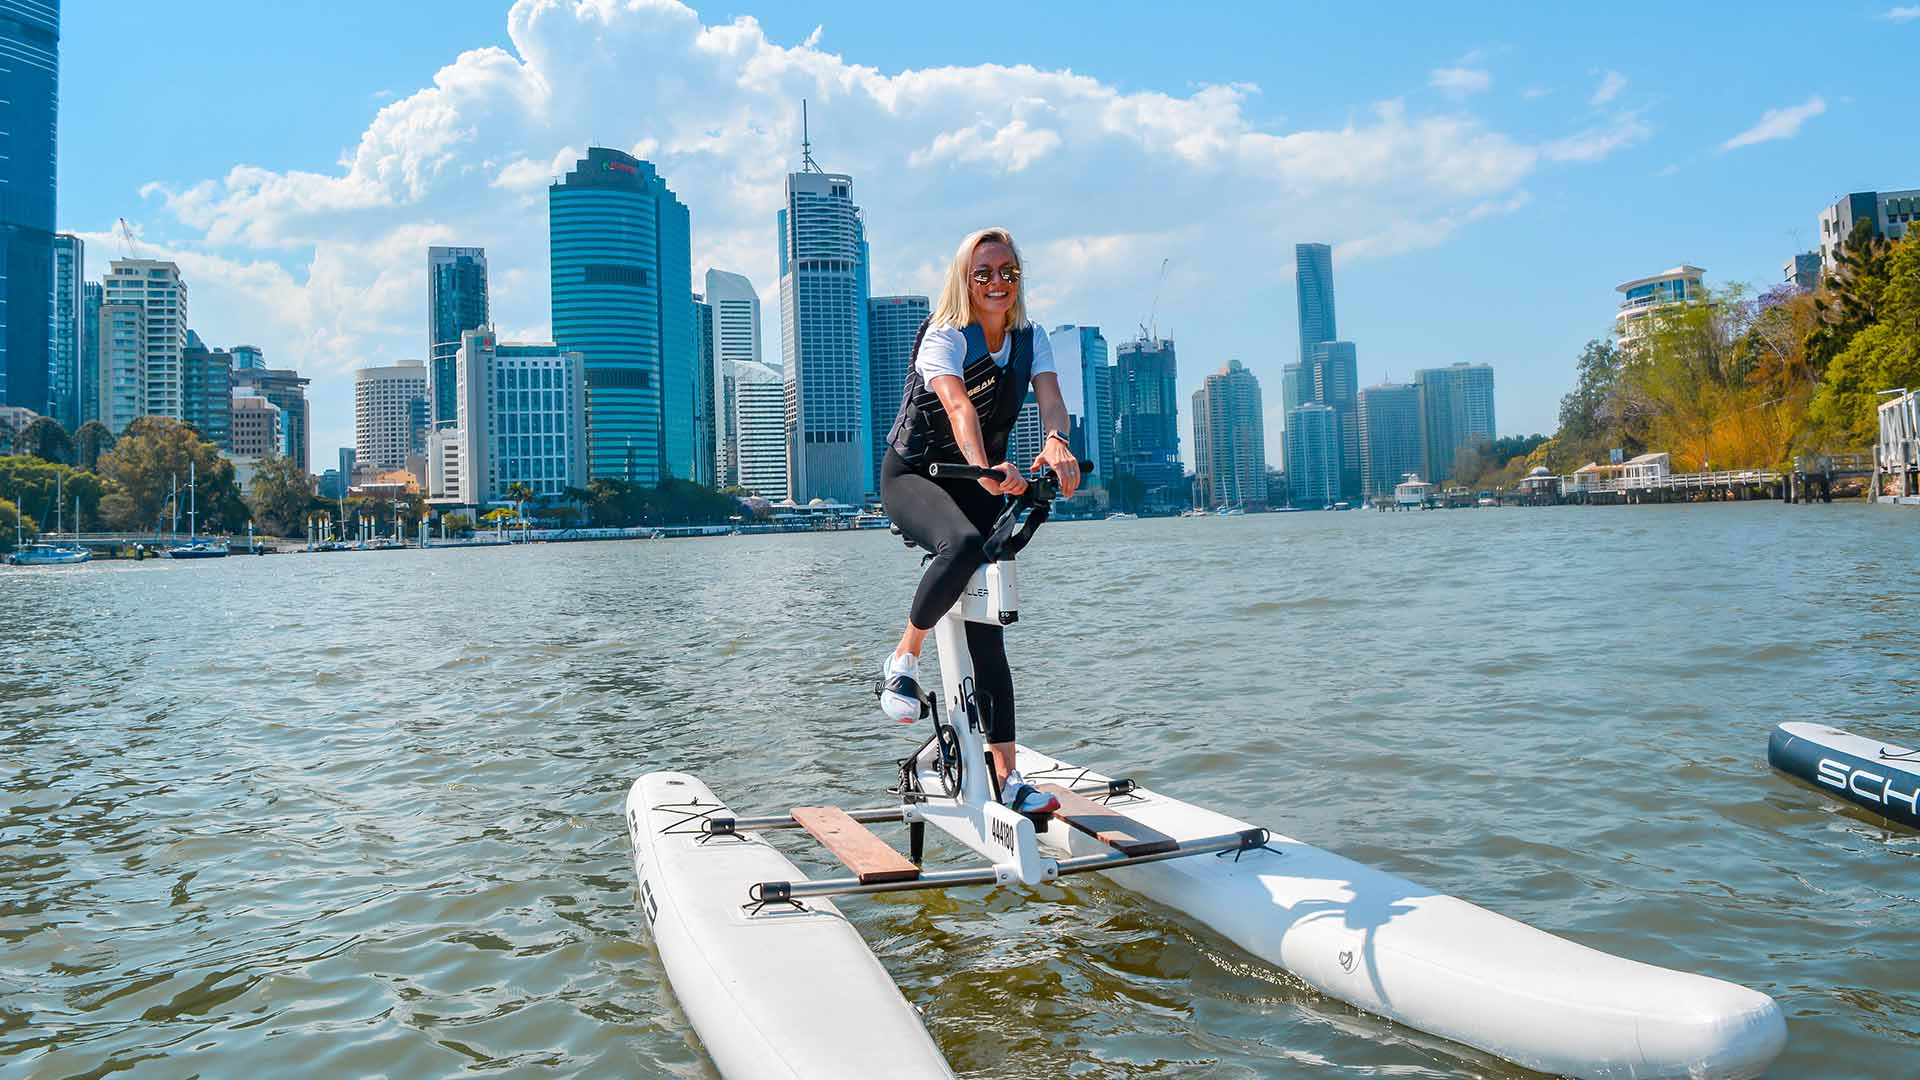 You Can Now Hire a Water Bike to Pedal Your Way Along the Brisbane River